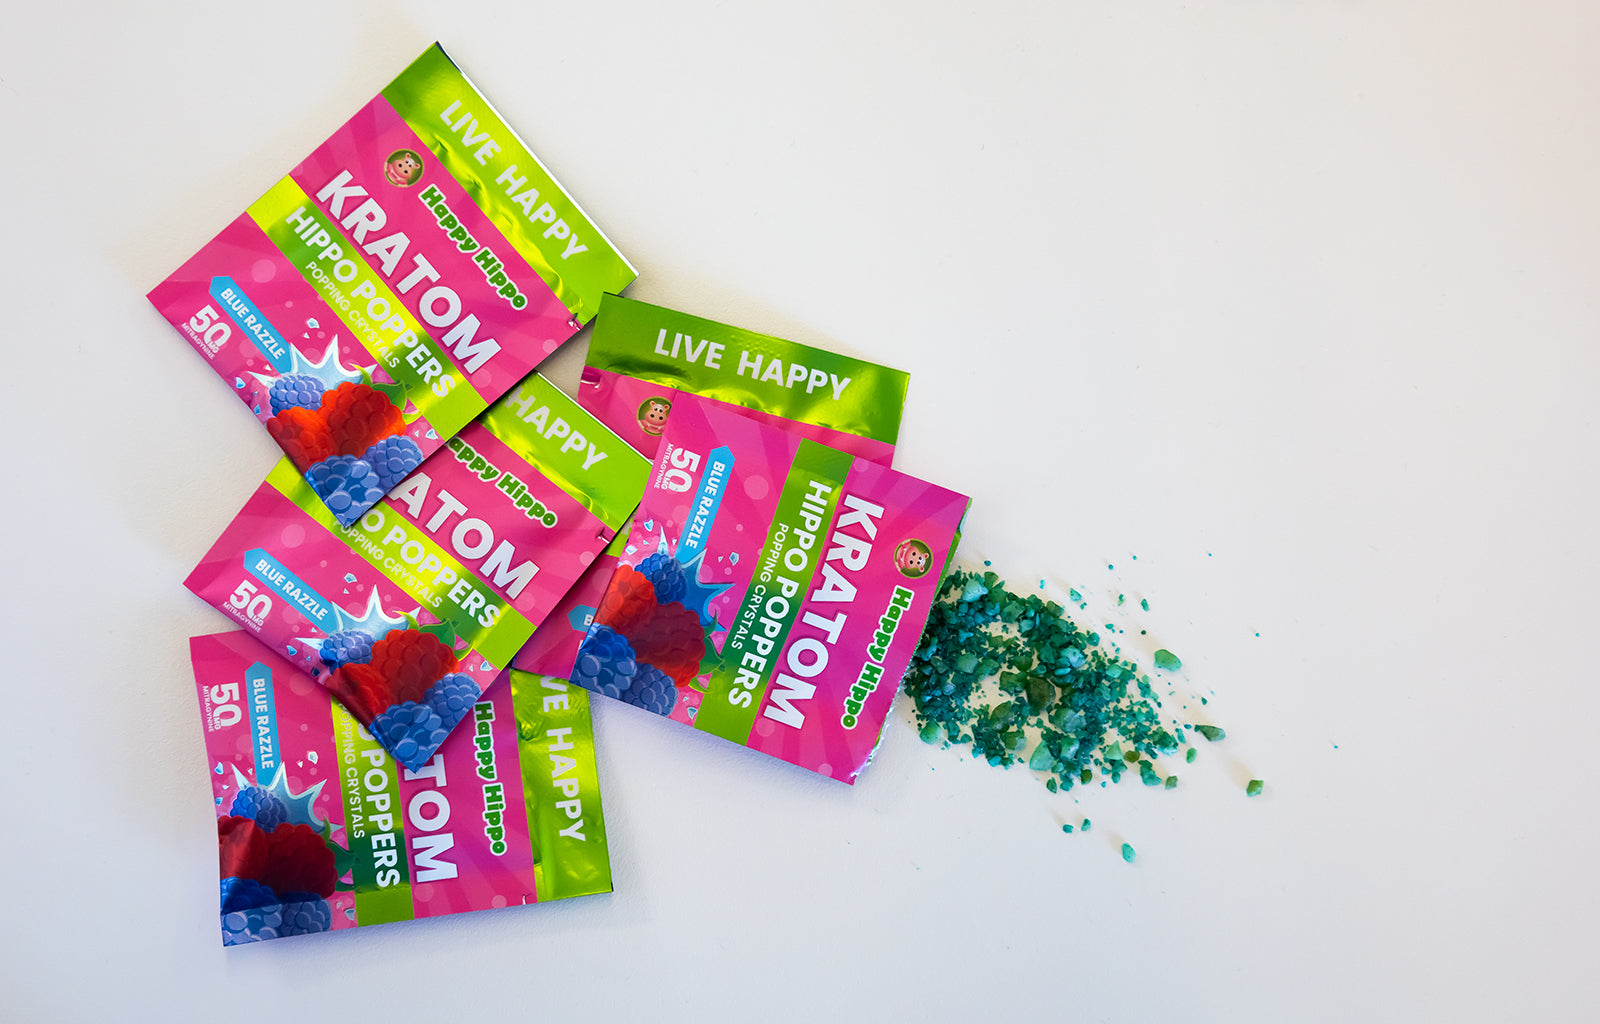 Featured Image depicting several packets of Hippo Poppers - Popping Candy Crystals! One of the packets is open, with several green popping candy crystals spilled out onto the counter.